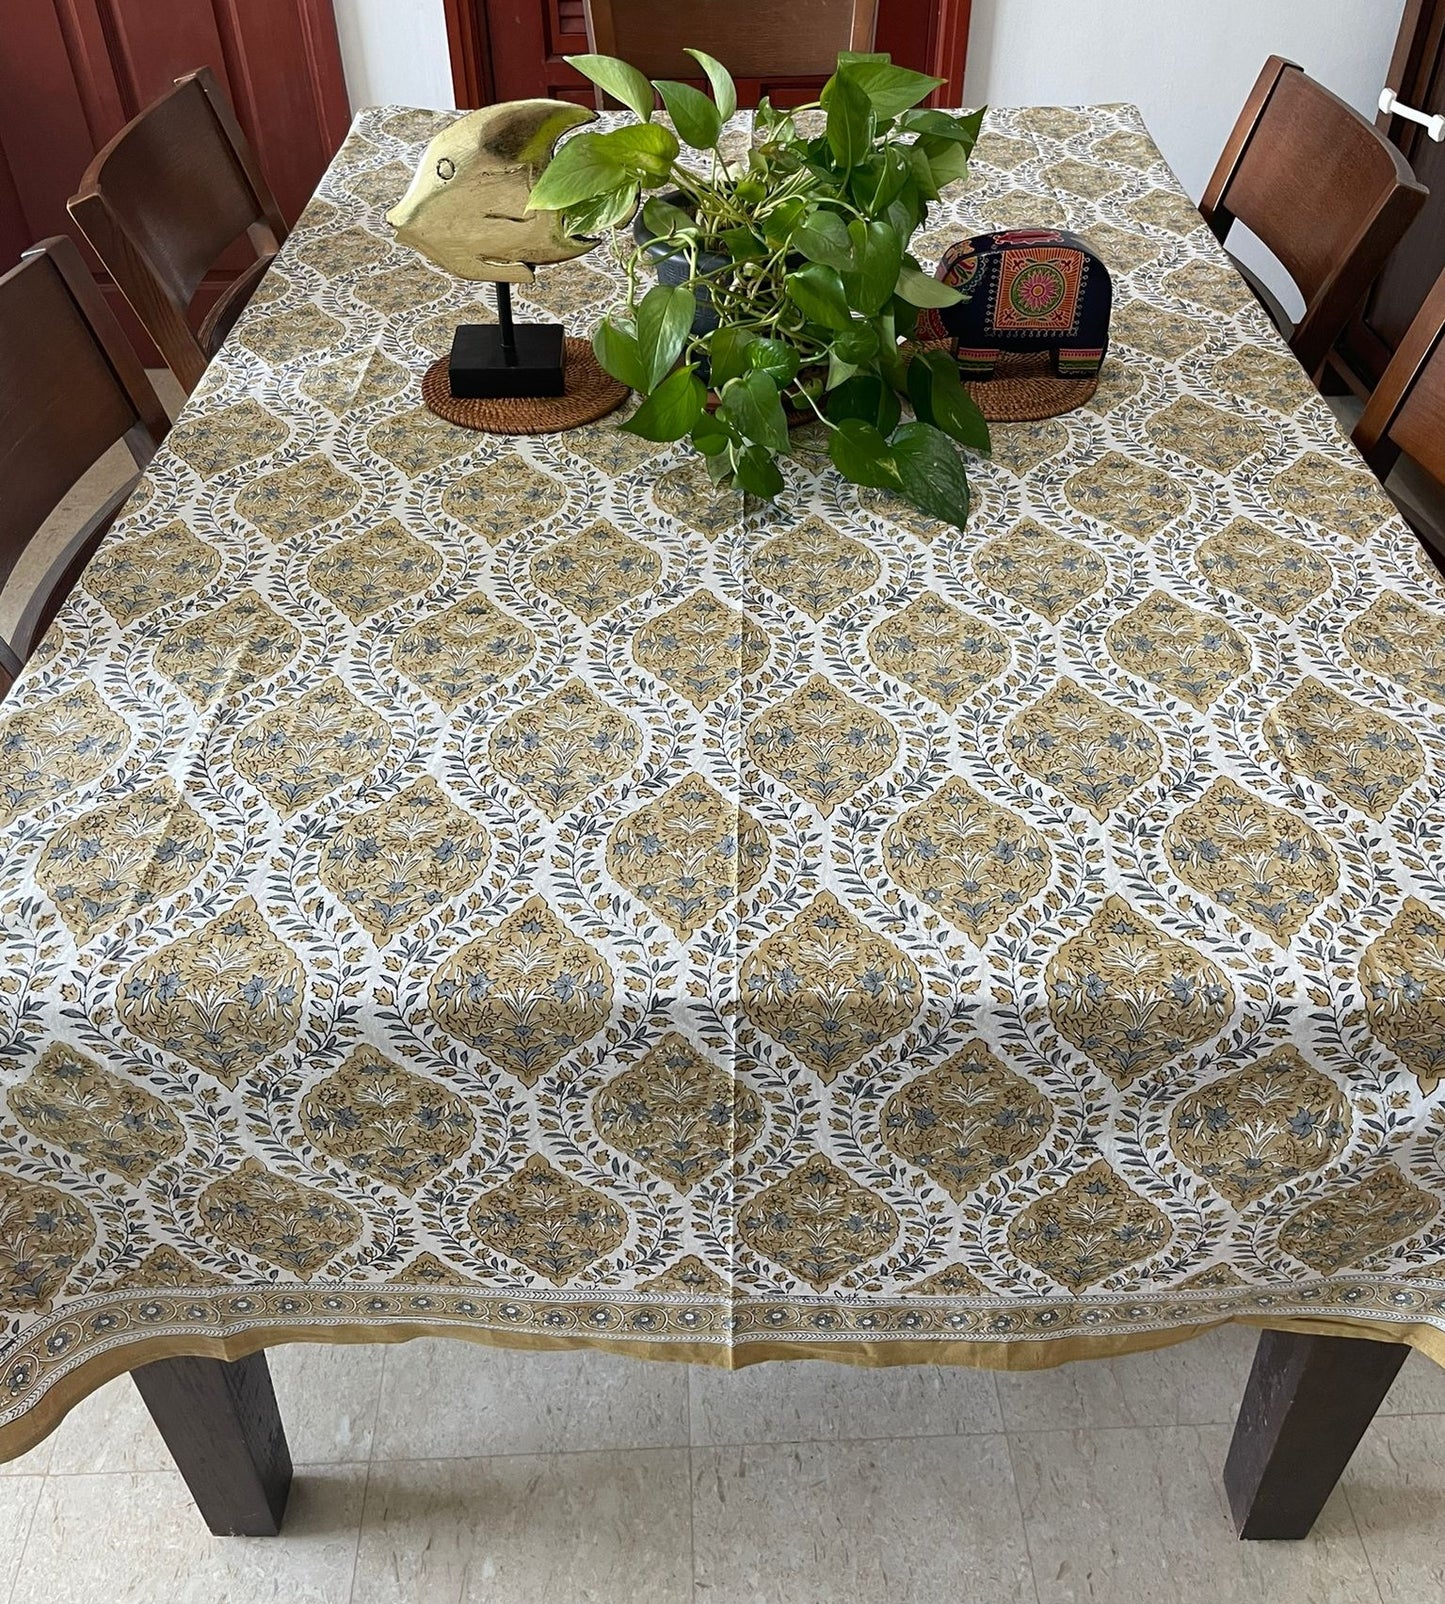 High quality and premium table cloth for dining table for women, shop now in Singapore